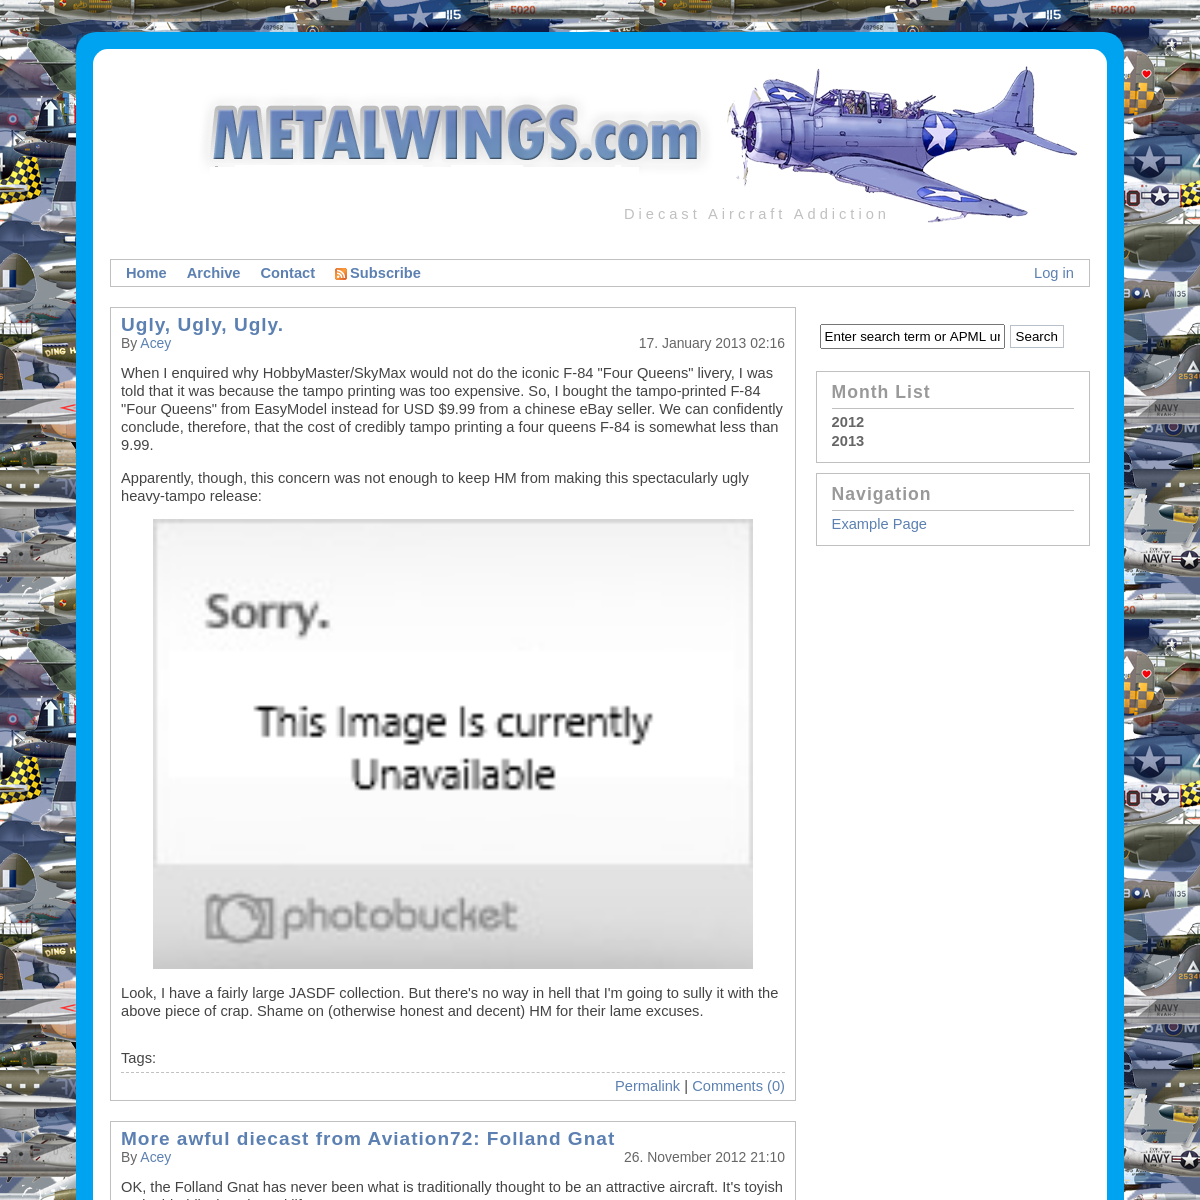 A complete backup of metalwings.com